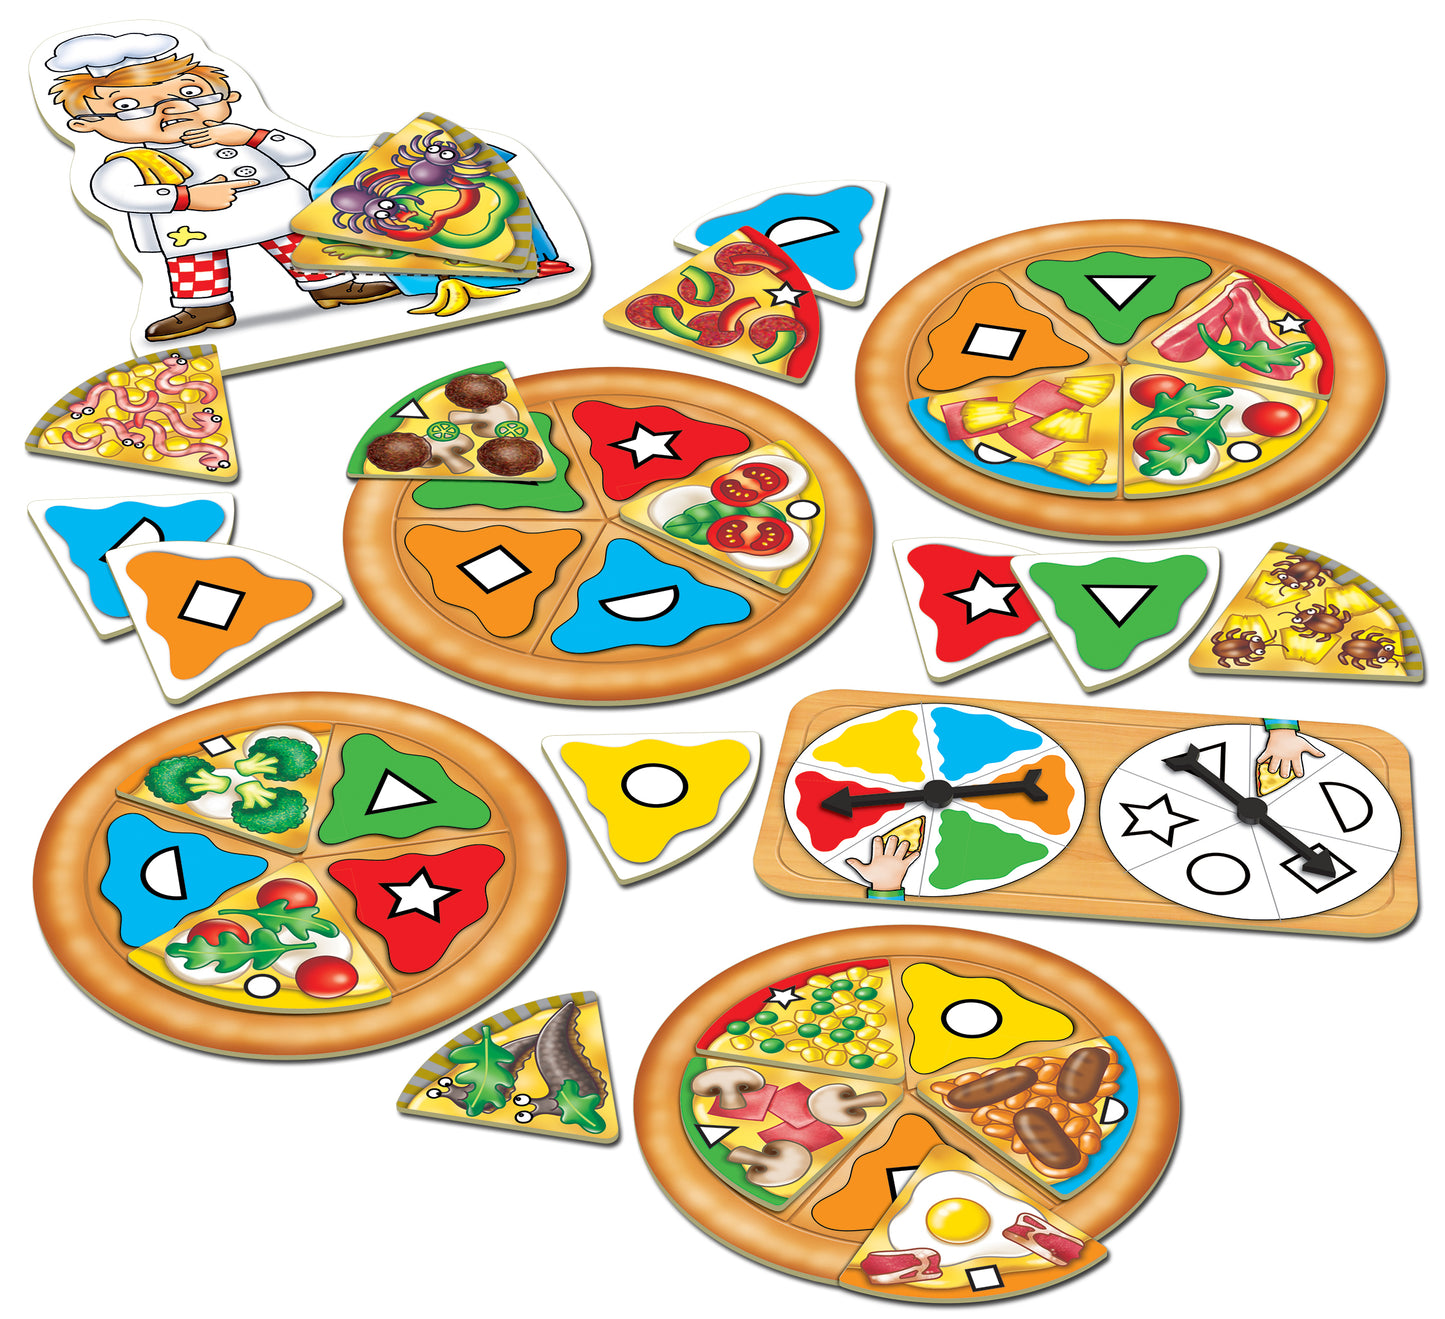 Orchard Toys Pizza, Pizza Colour and Shape Matching Game